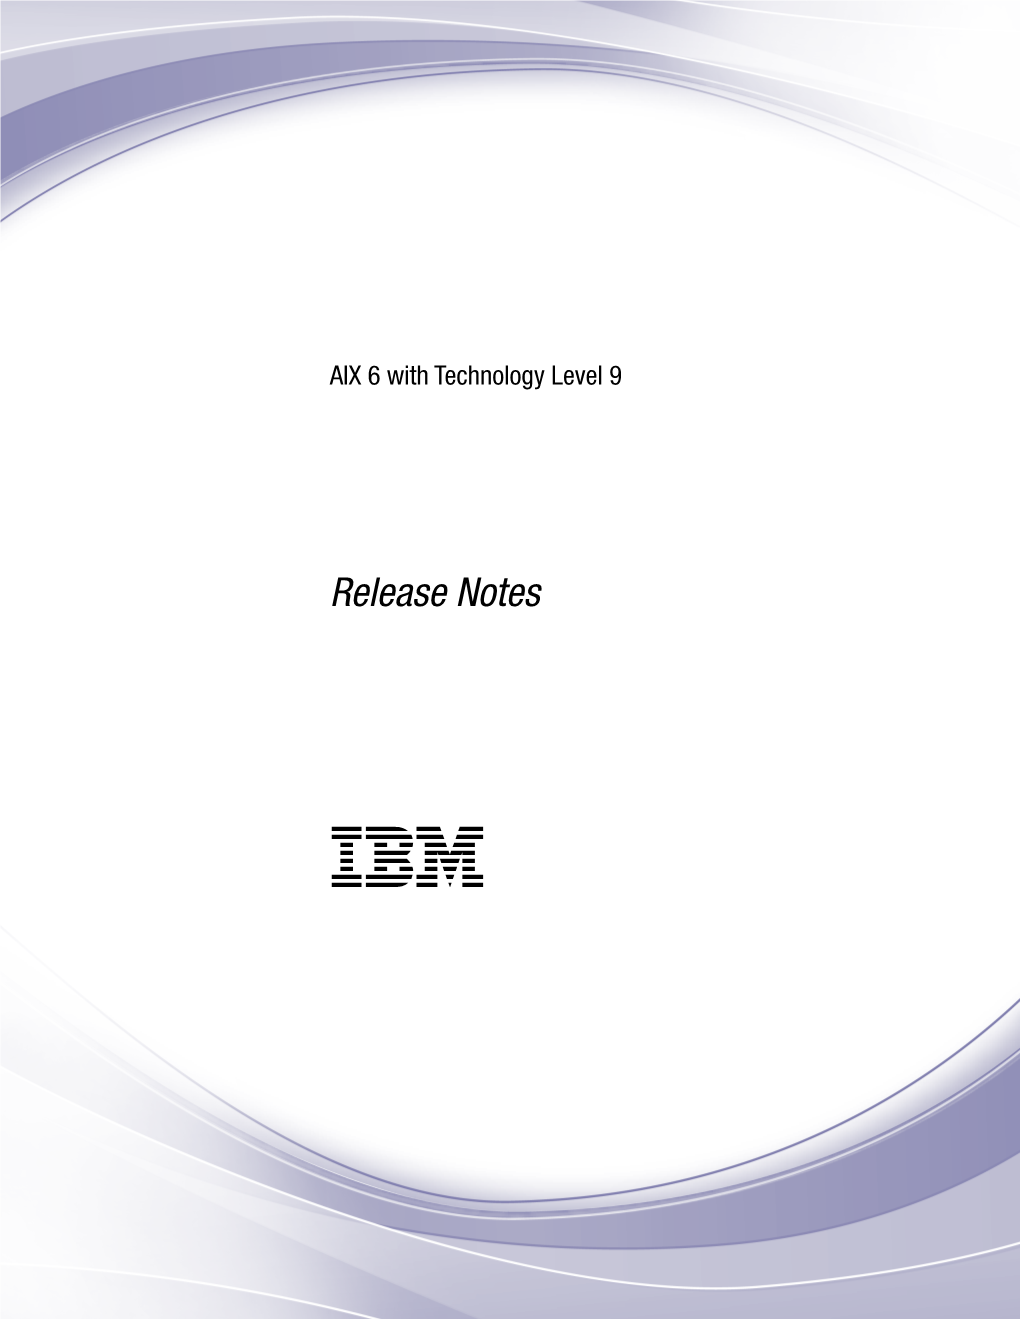 AIX 6 with Technology Level 9: Release Notes About This Document